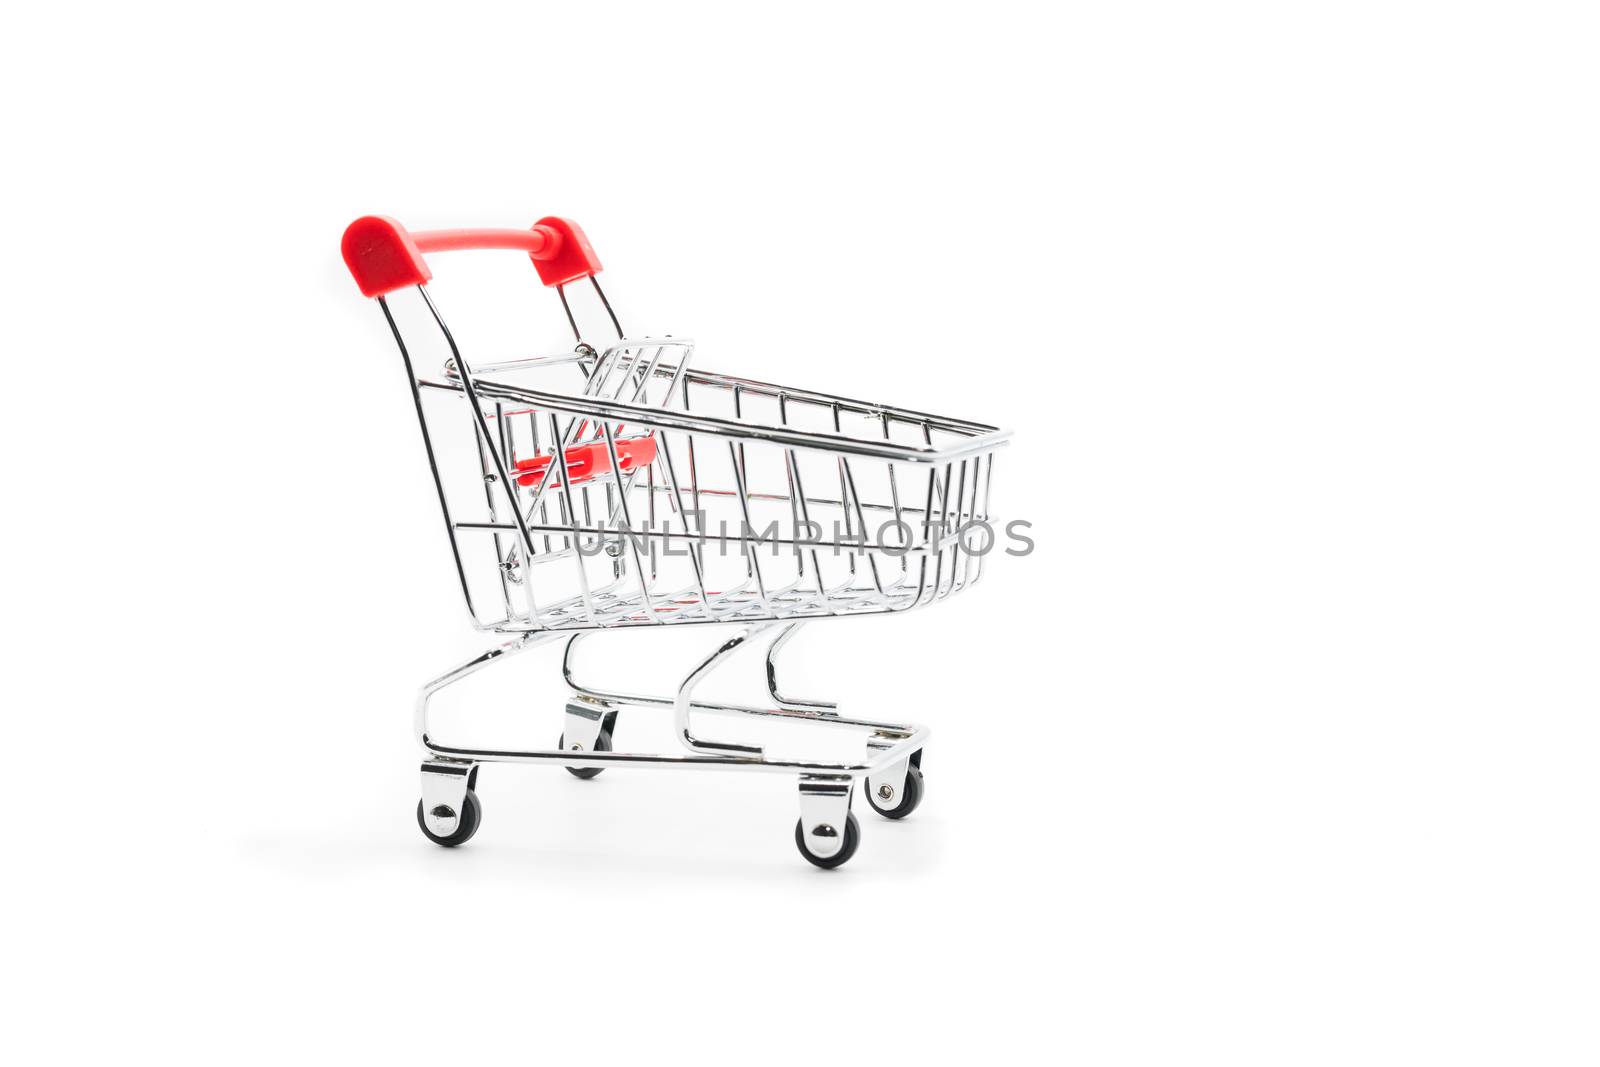 Empty shopping cart trolley isolated on white backgrounds by psodaz